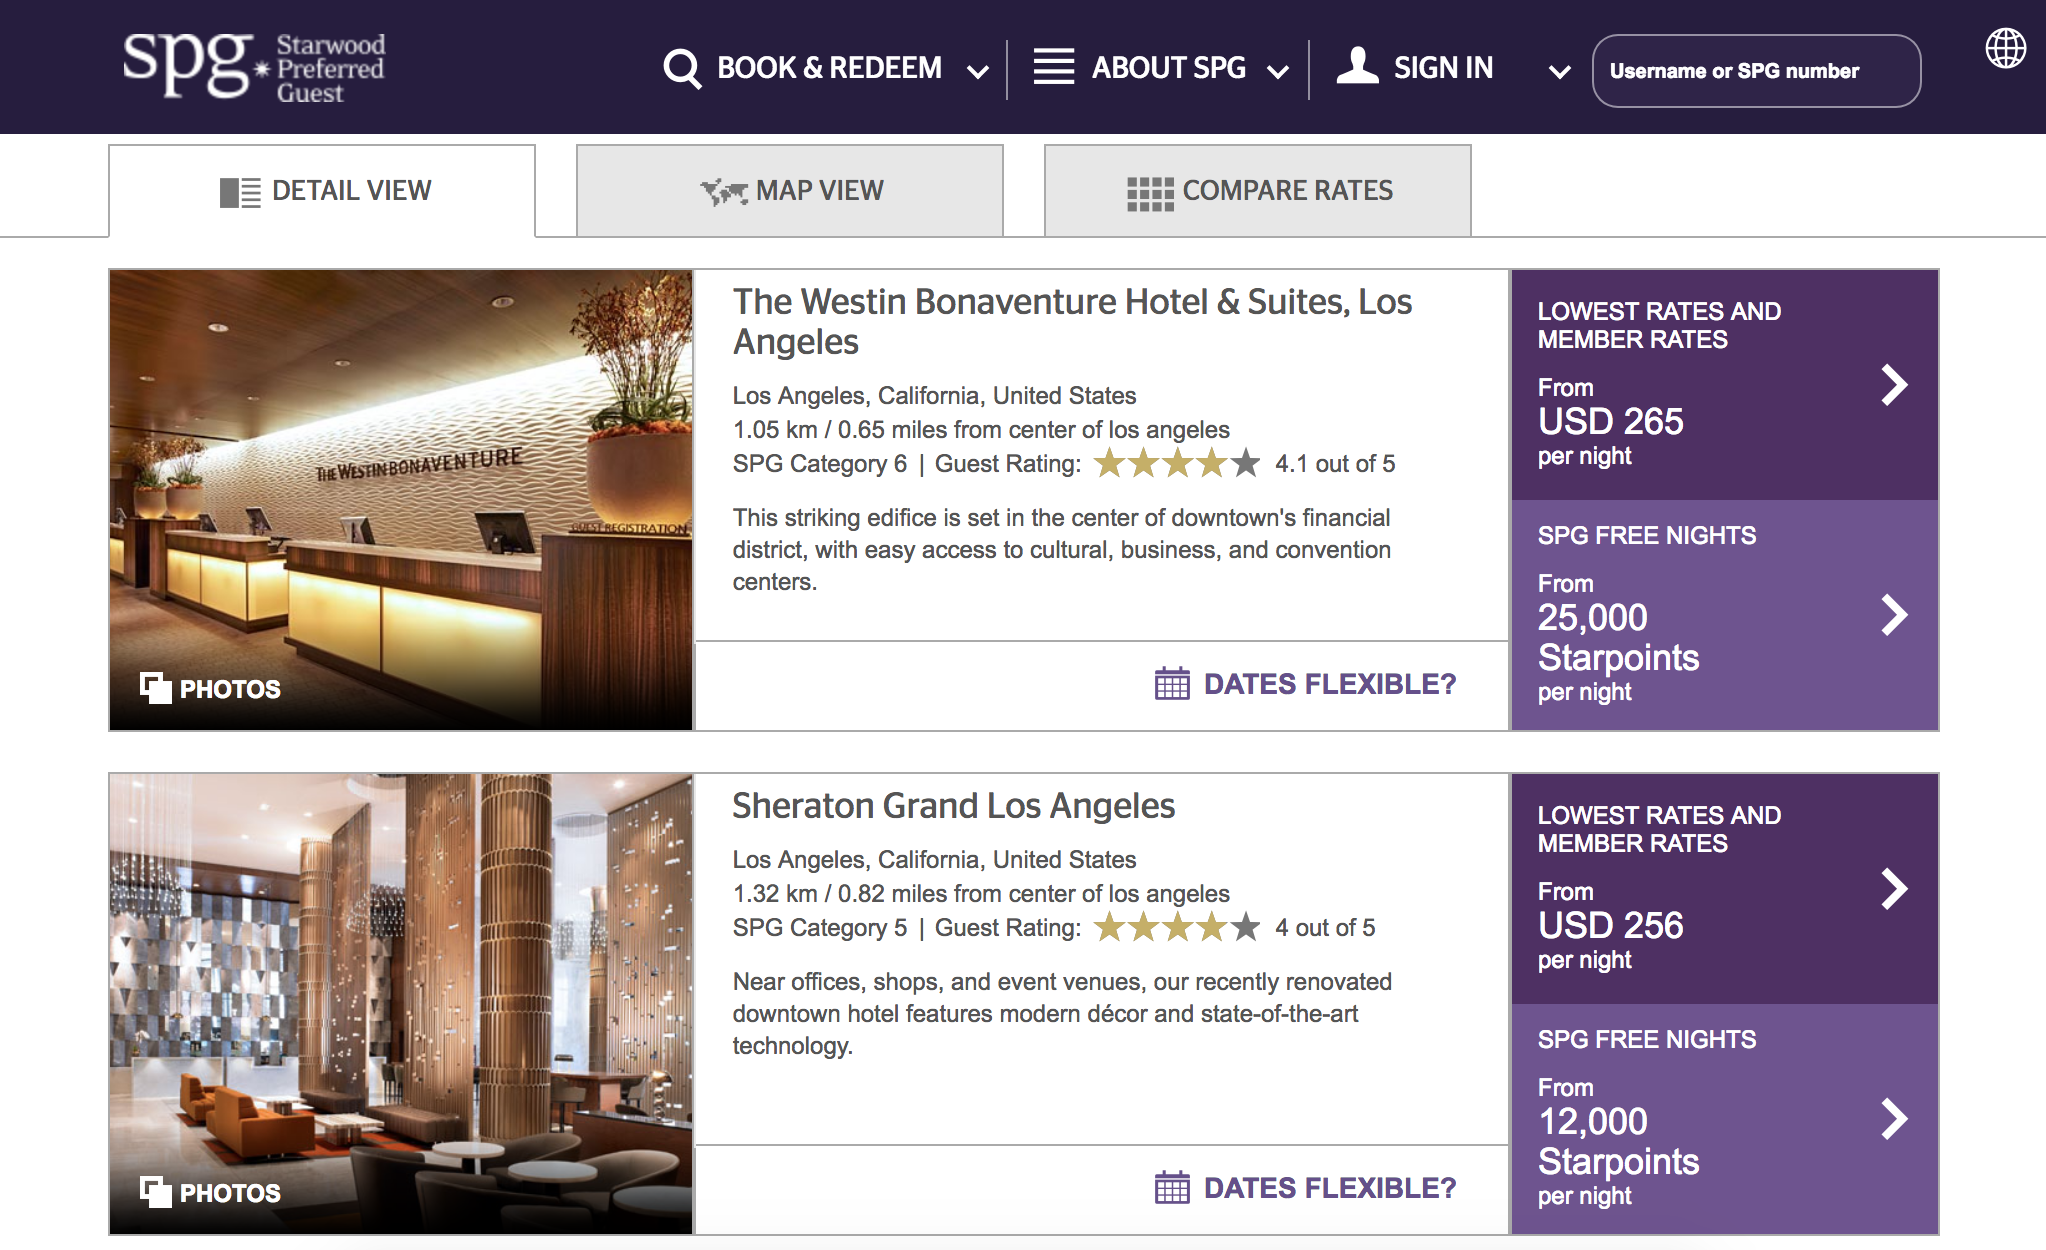 A lot of money for two very boring SPG properties (Image: SPG.com)